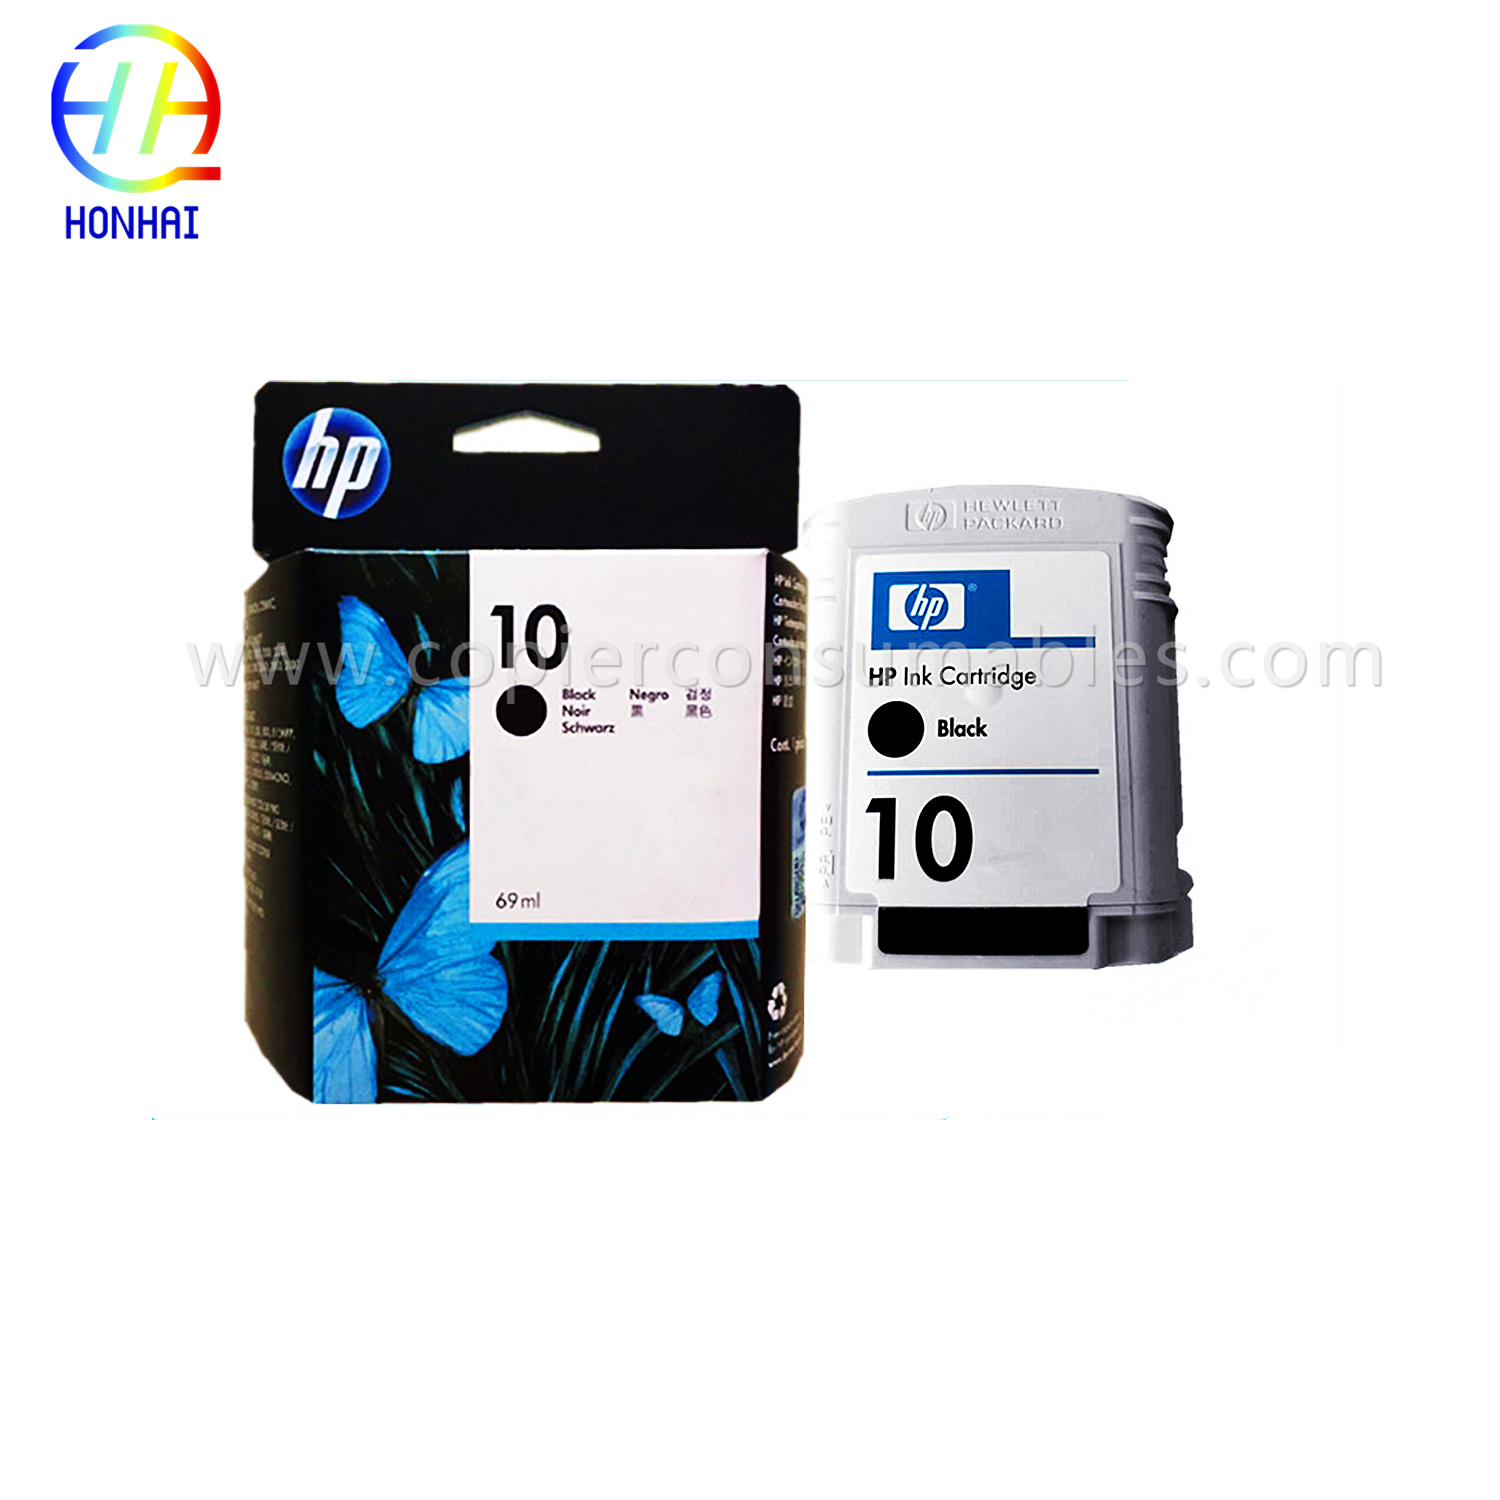 Ink Cartridge for HP 800 500 815 820 9110 9120 9130 (C4844A 10) OEM